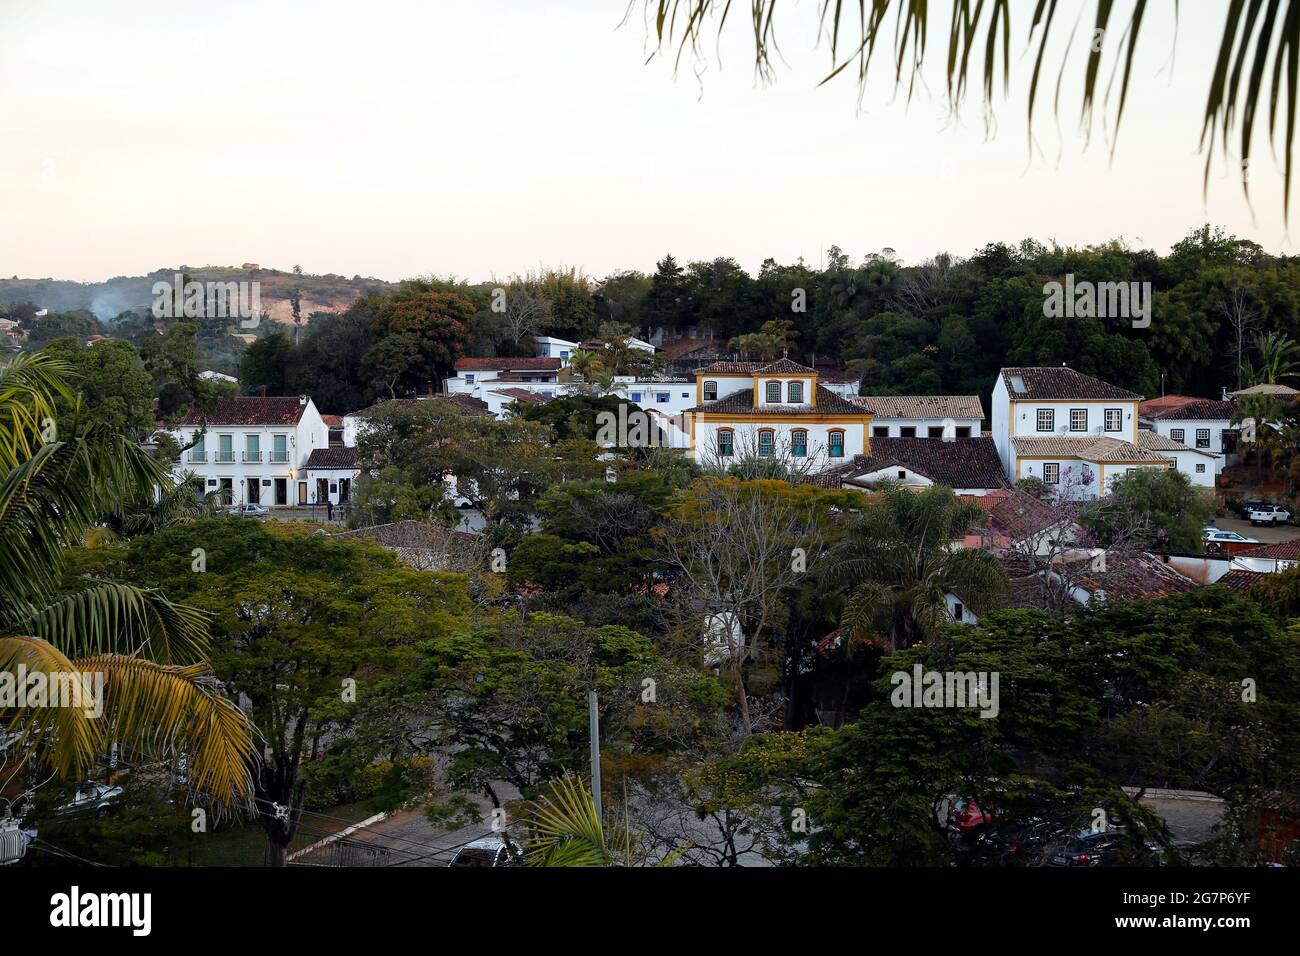 Tiradentes, Minas Gerais, Brazil - July 14, 2021: houses and characteristic architecture in the city historic Tiradentes, interior of Minas Gerais Stock Photo